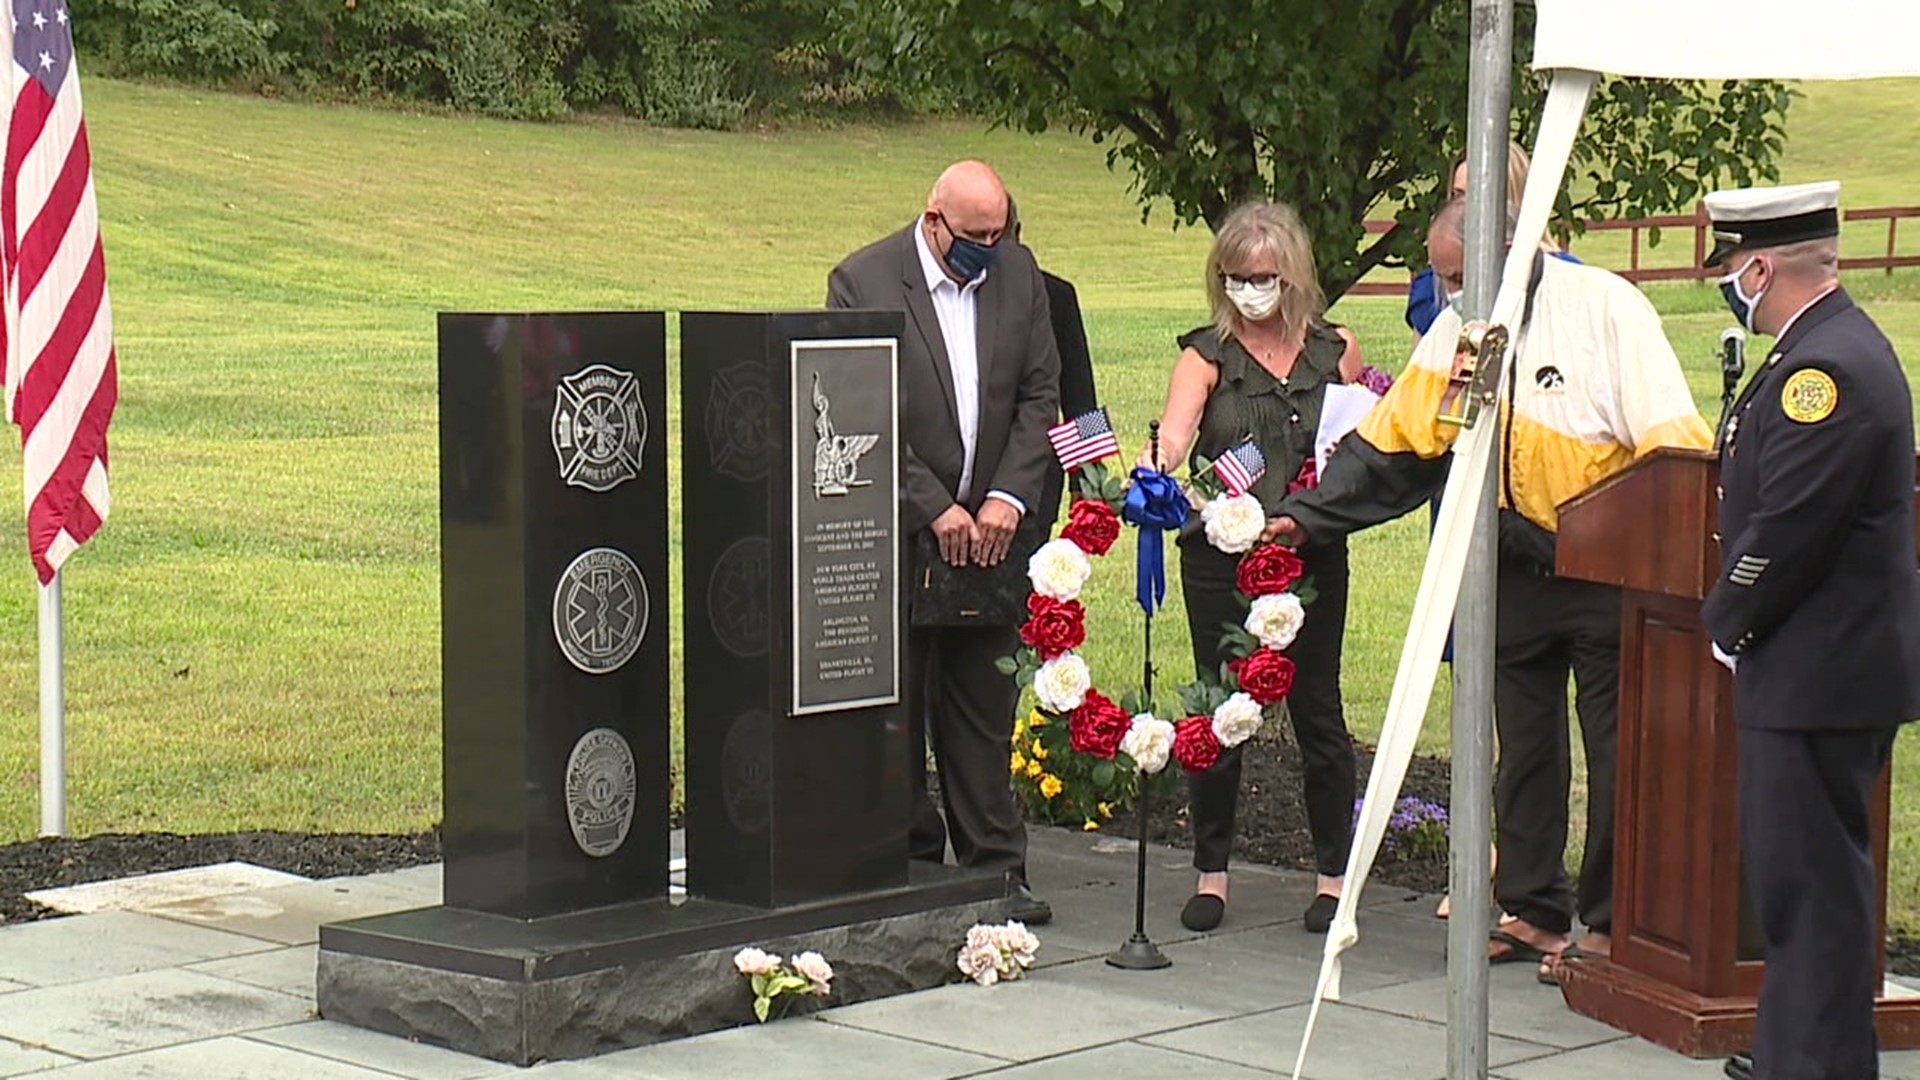 The memorial service at McDade Park in Scranton to remember September 11 was a little bit different this year, honoring first responders and essential workers.